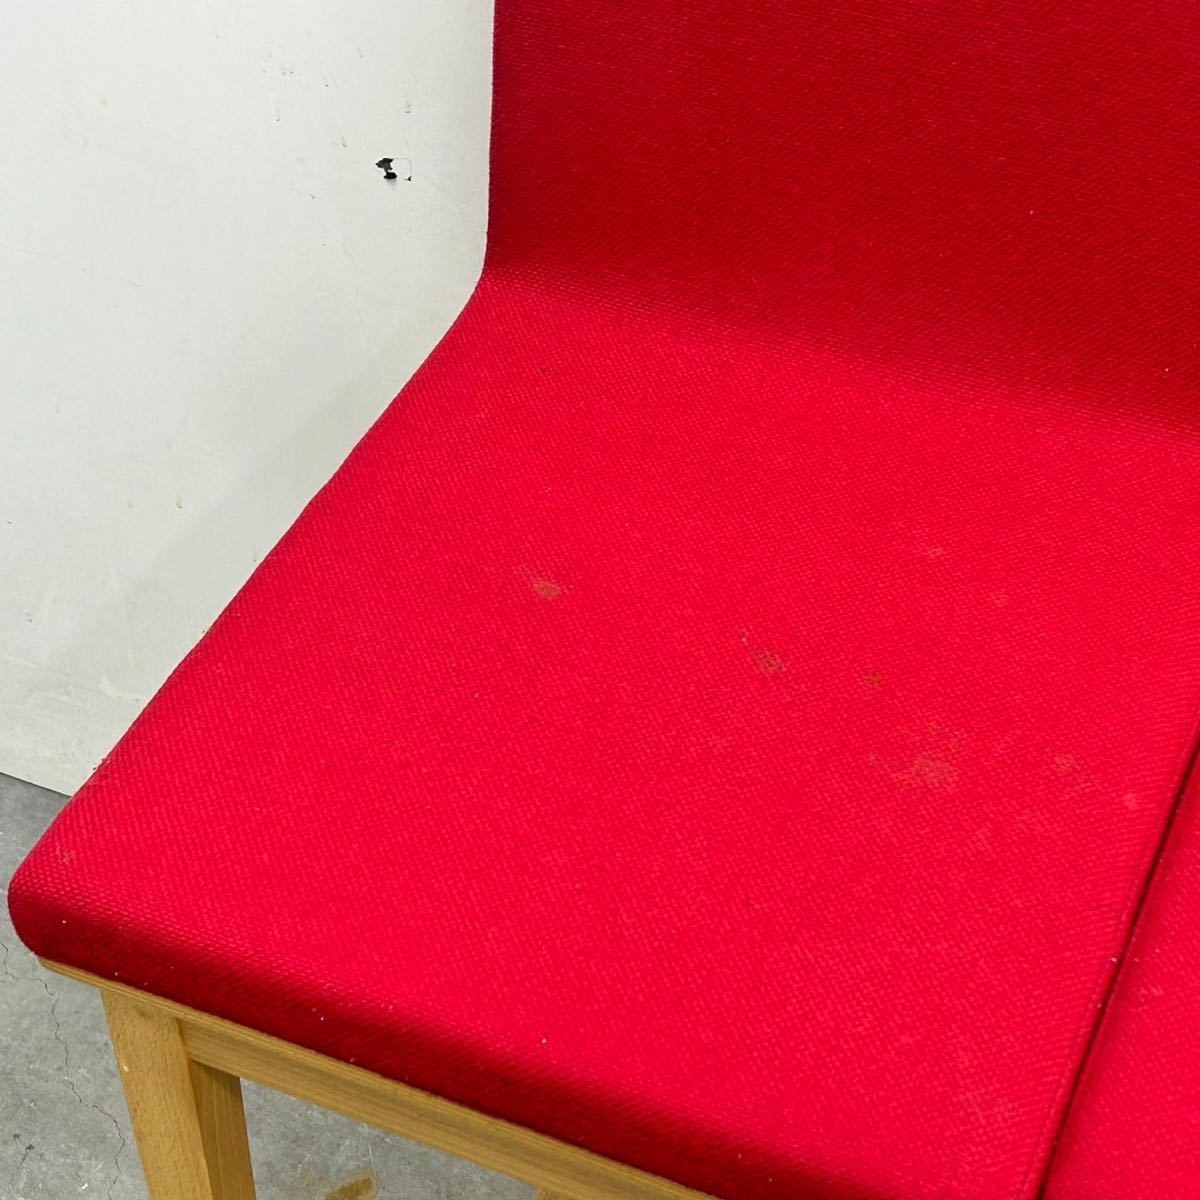 4 legs set * counter chair 330×H720 bearing surface height 720 wooden fabric red red store chair used 